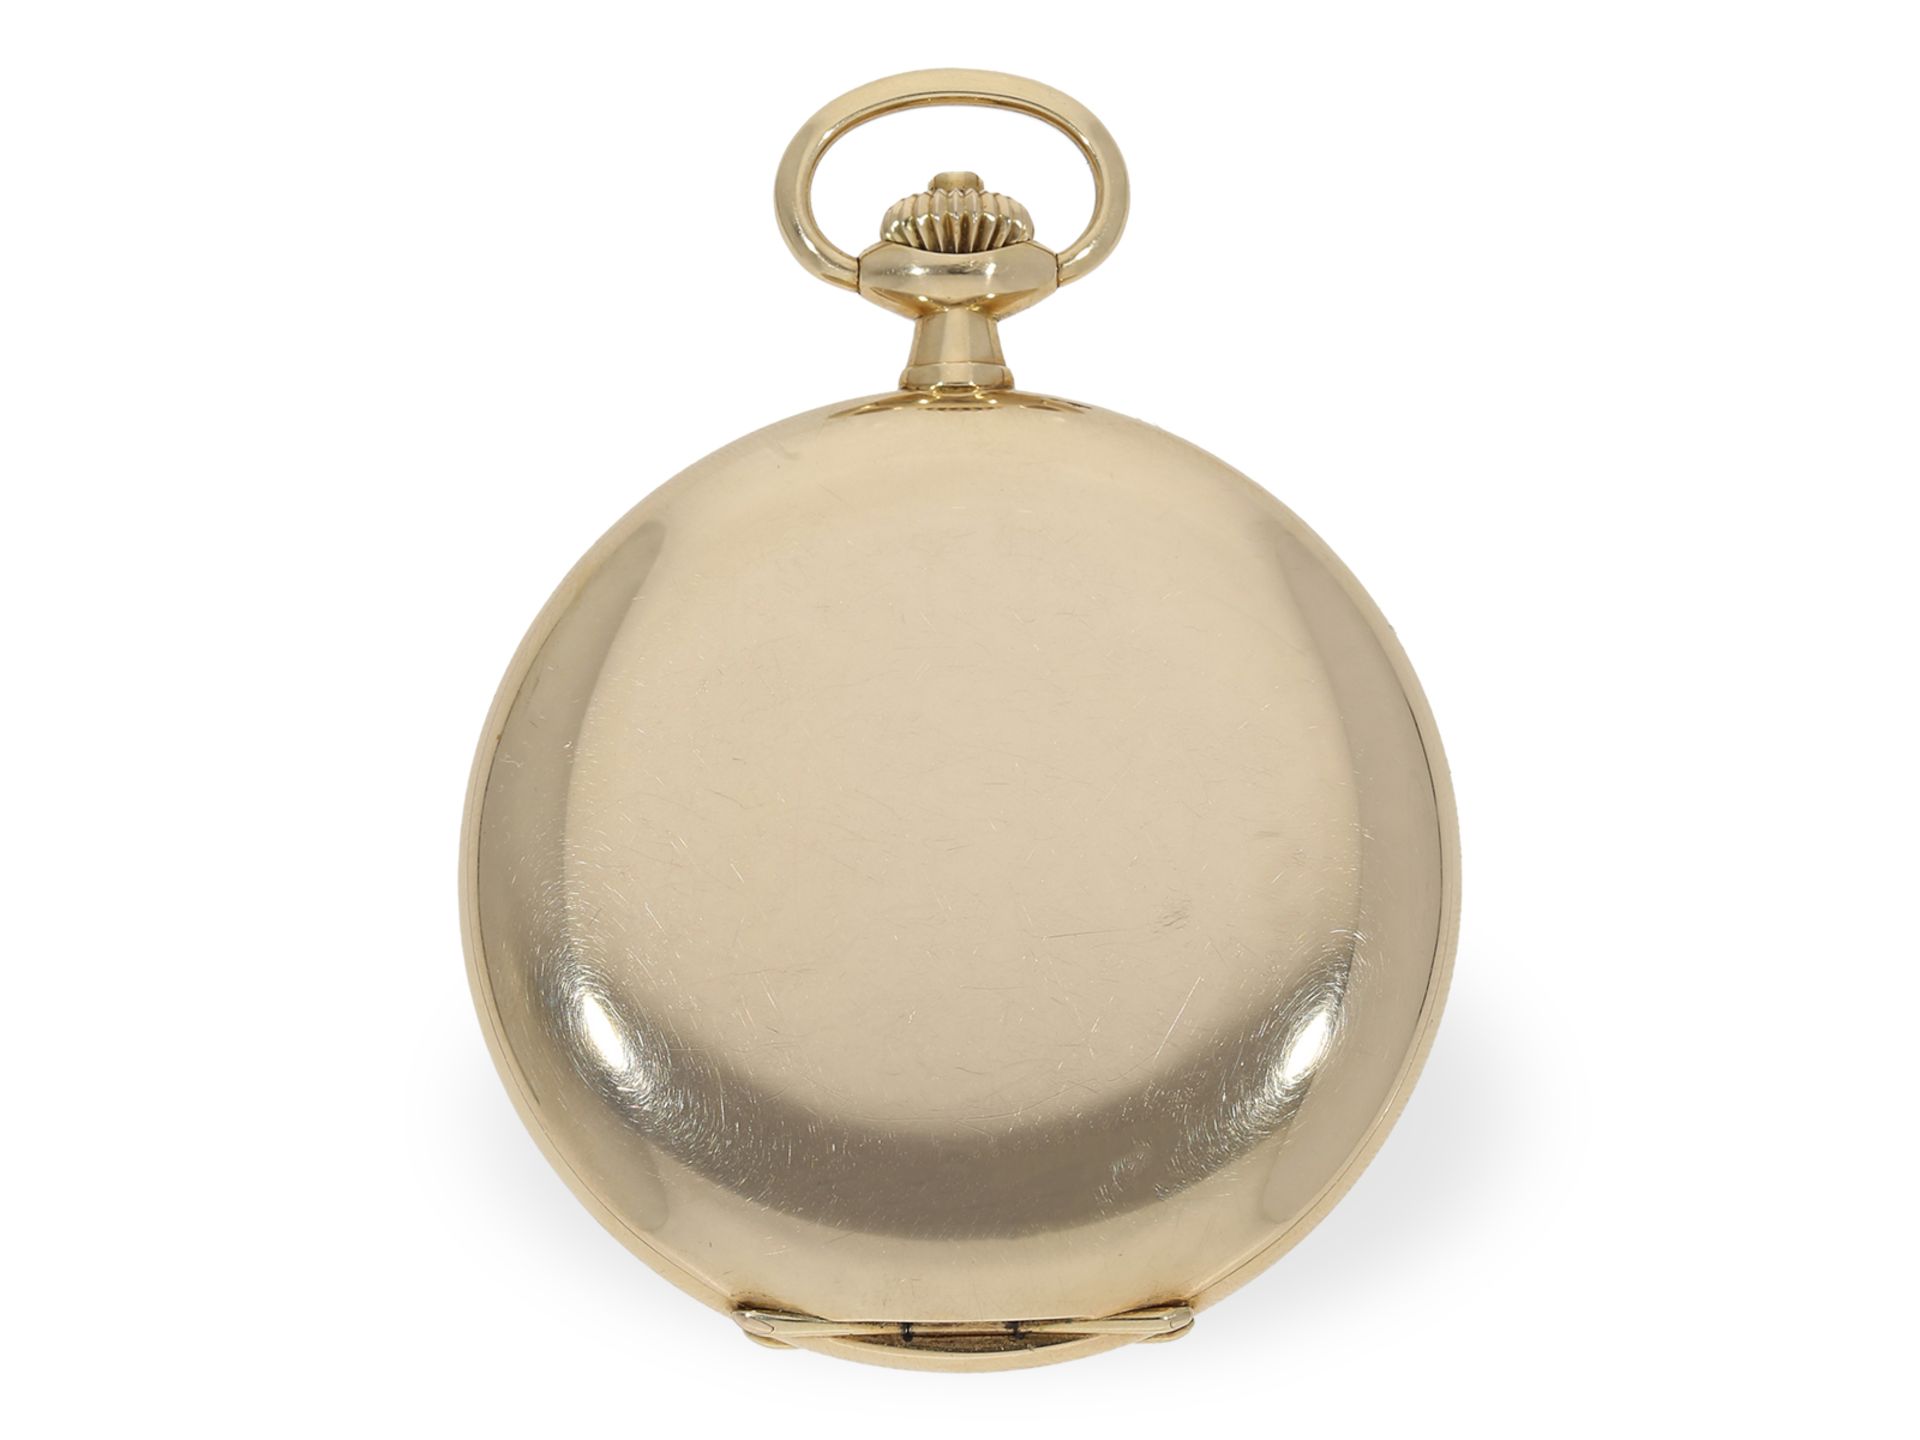 Pocket watch: very well preserved A. Lange & Söhne gold hunting case watch from 1926, collector's wa - Image 6 of 7